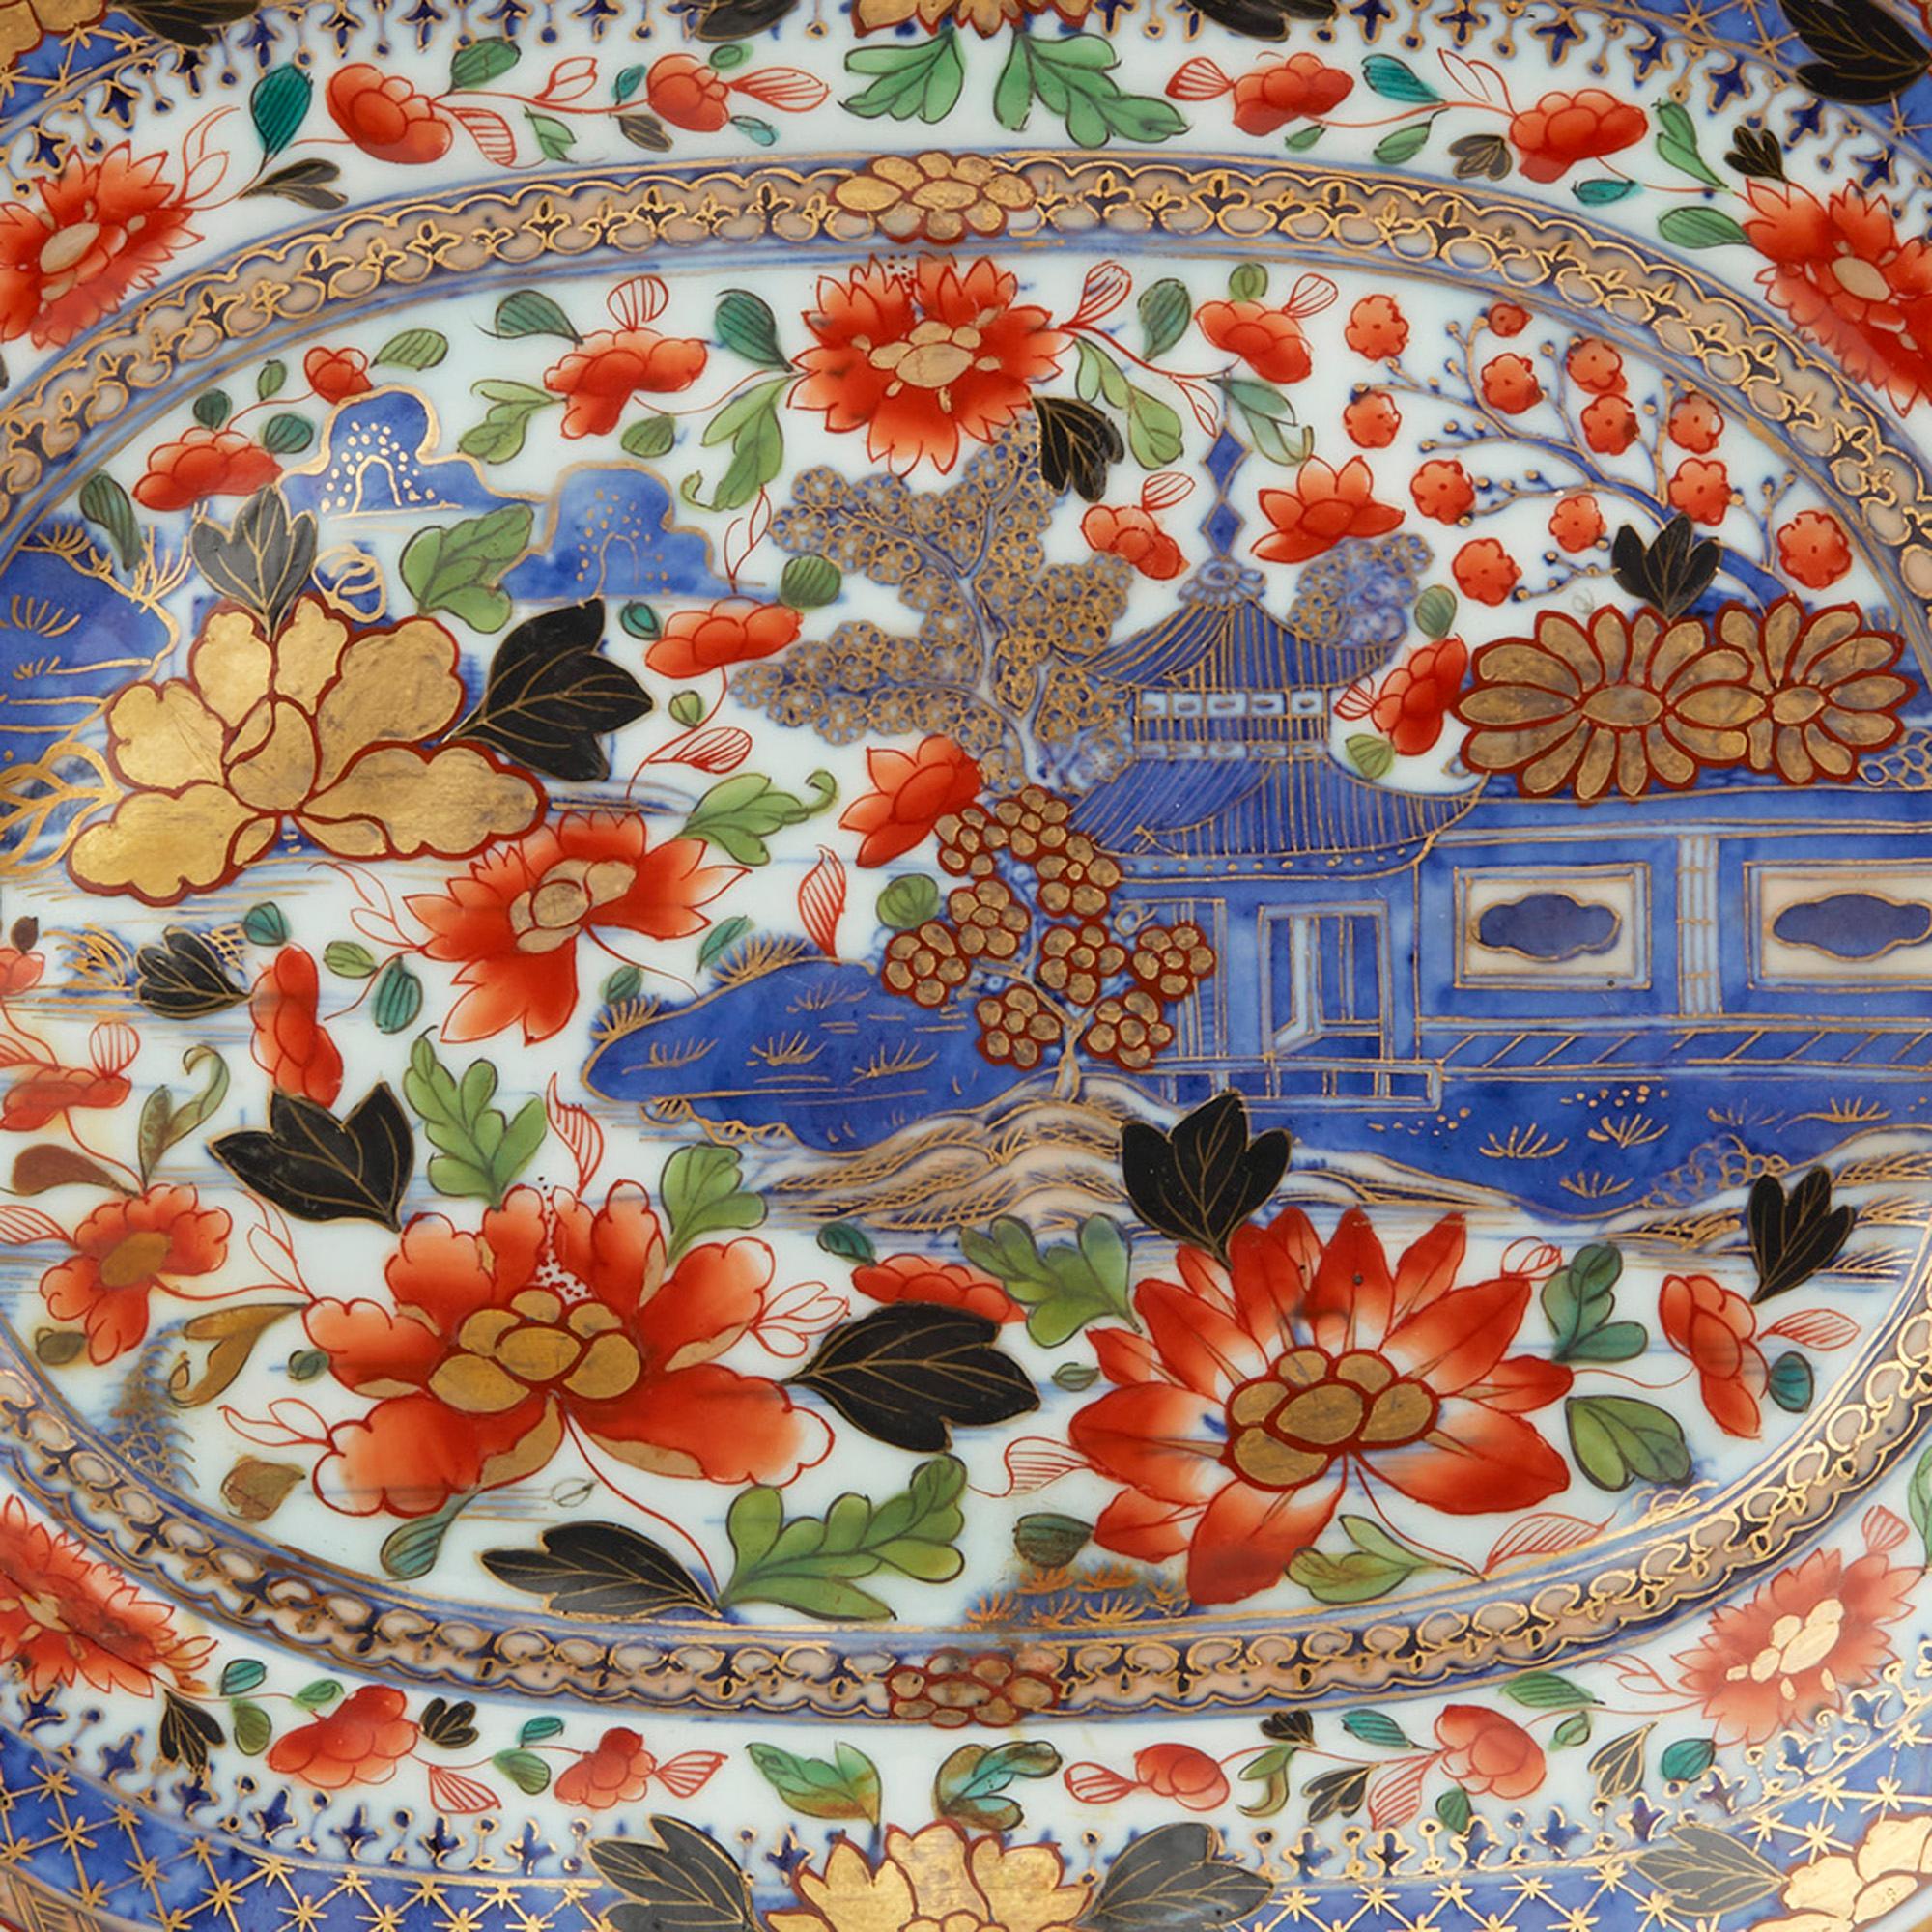 A stunning and exceptional antique Chinese qianlong porcelain serving platter decorated in under glaze blue with a pagoda in a rocky river landscape and clobbered (over painted) in London with Imari style flowers in red, green and gilding. The